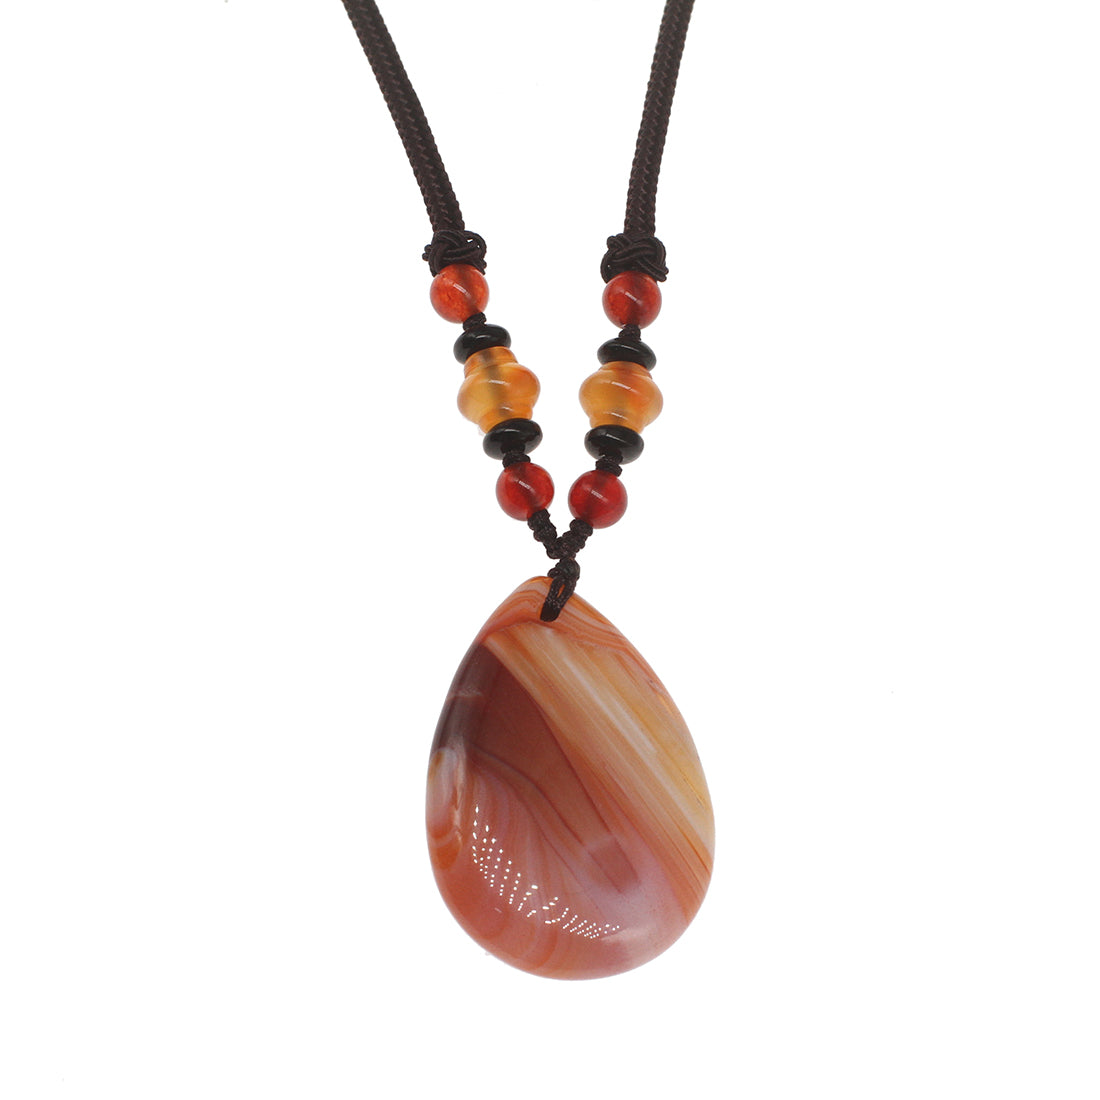 Red Agate Gemstone Pendant with Necklace - 42x27mm - Length 12 inch - 26g - NEW922